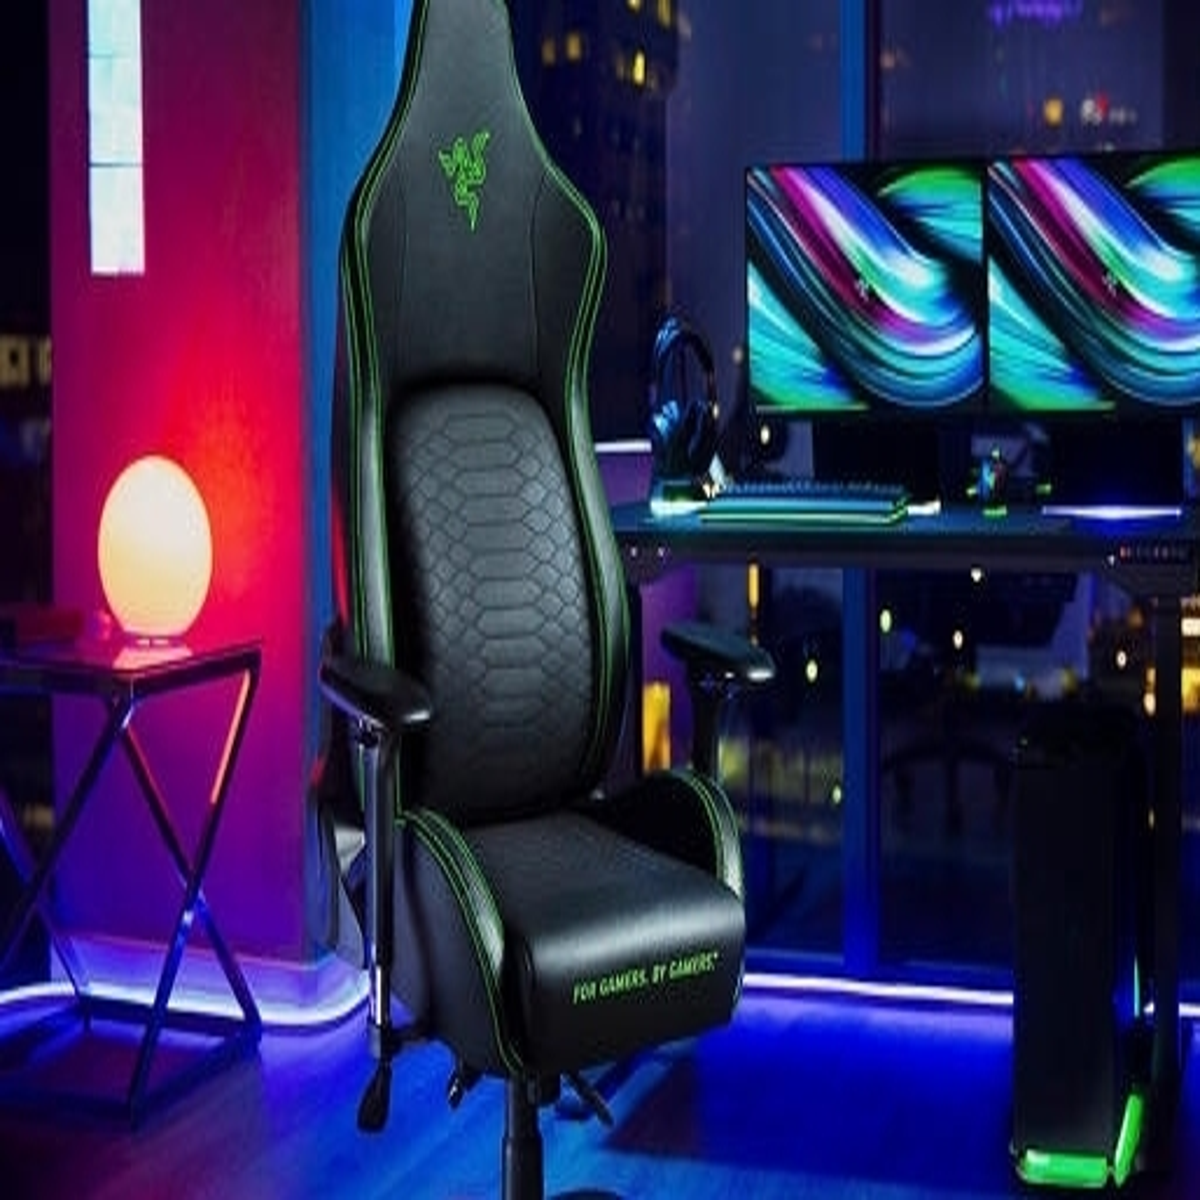 The Razer Iskur gaming chair is on offer for $350 this Black Friday | Stühle